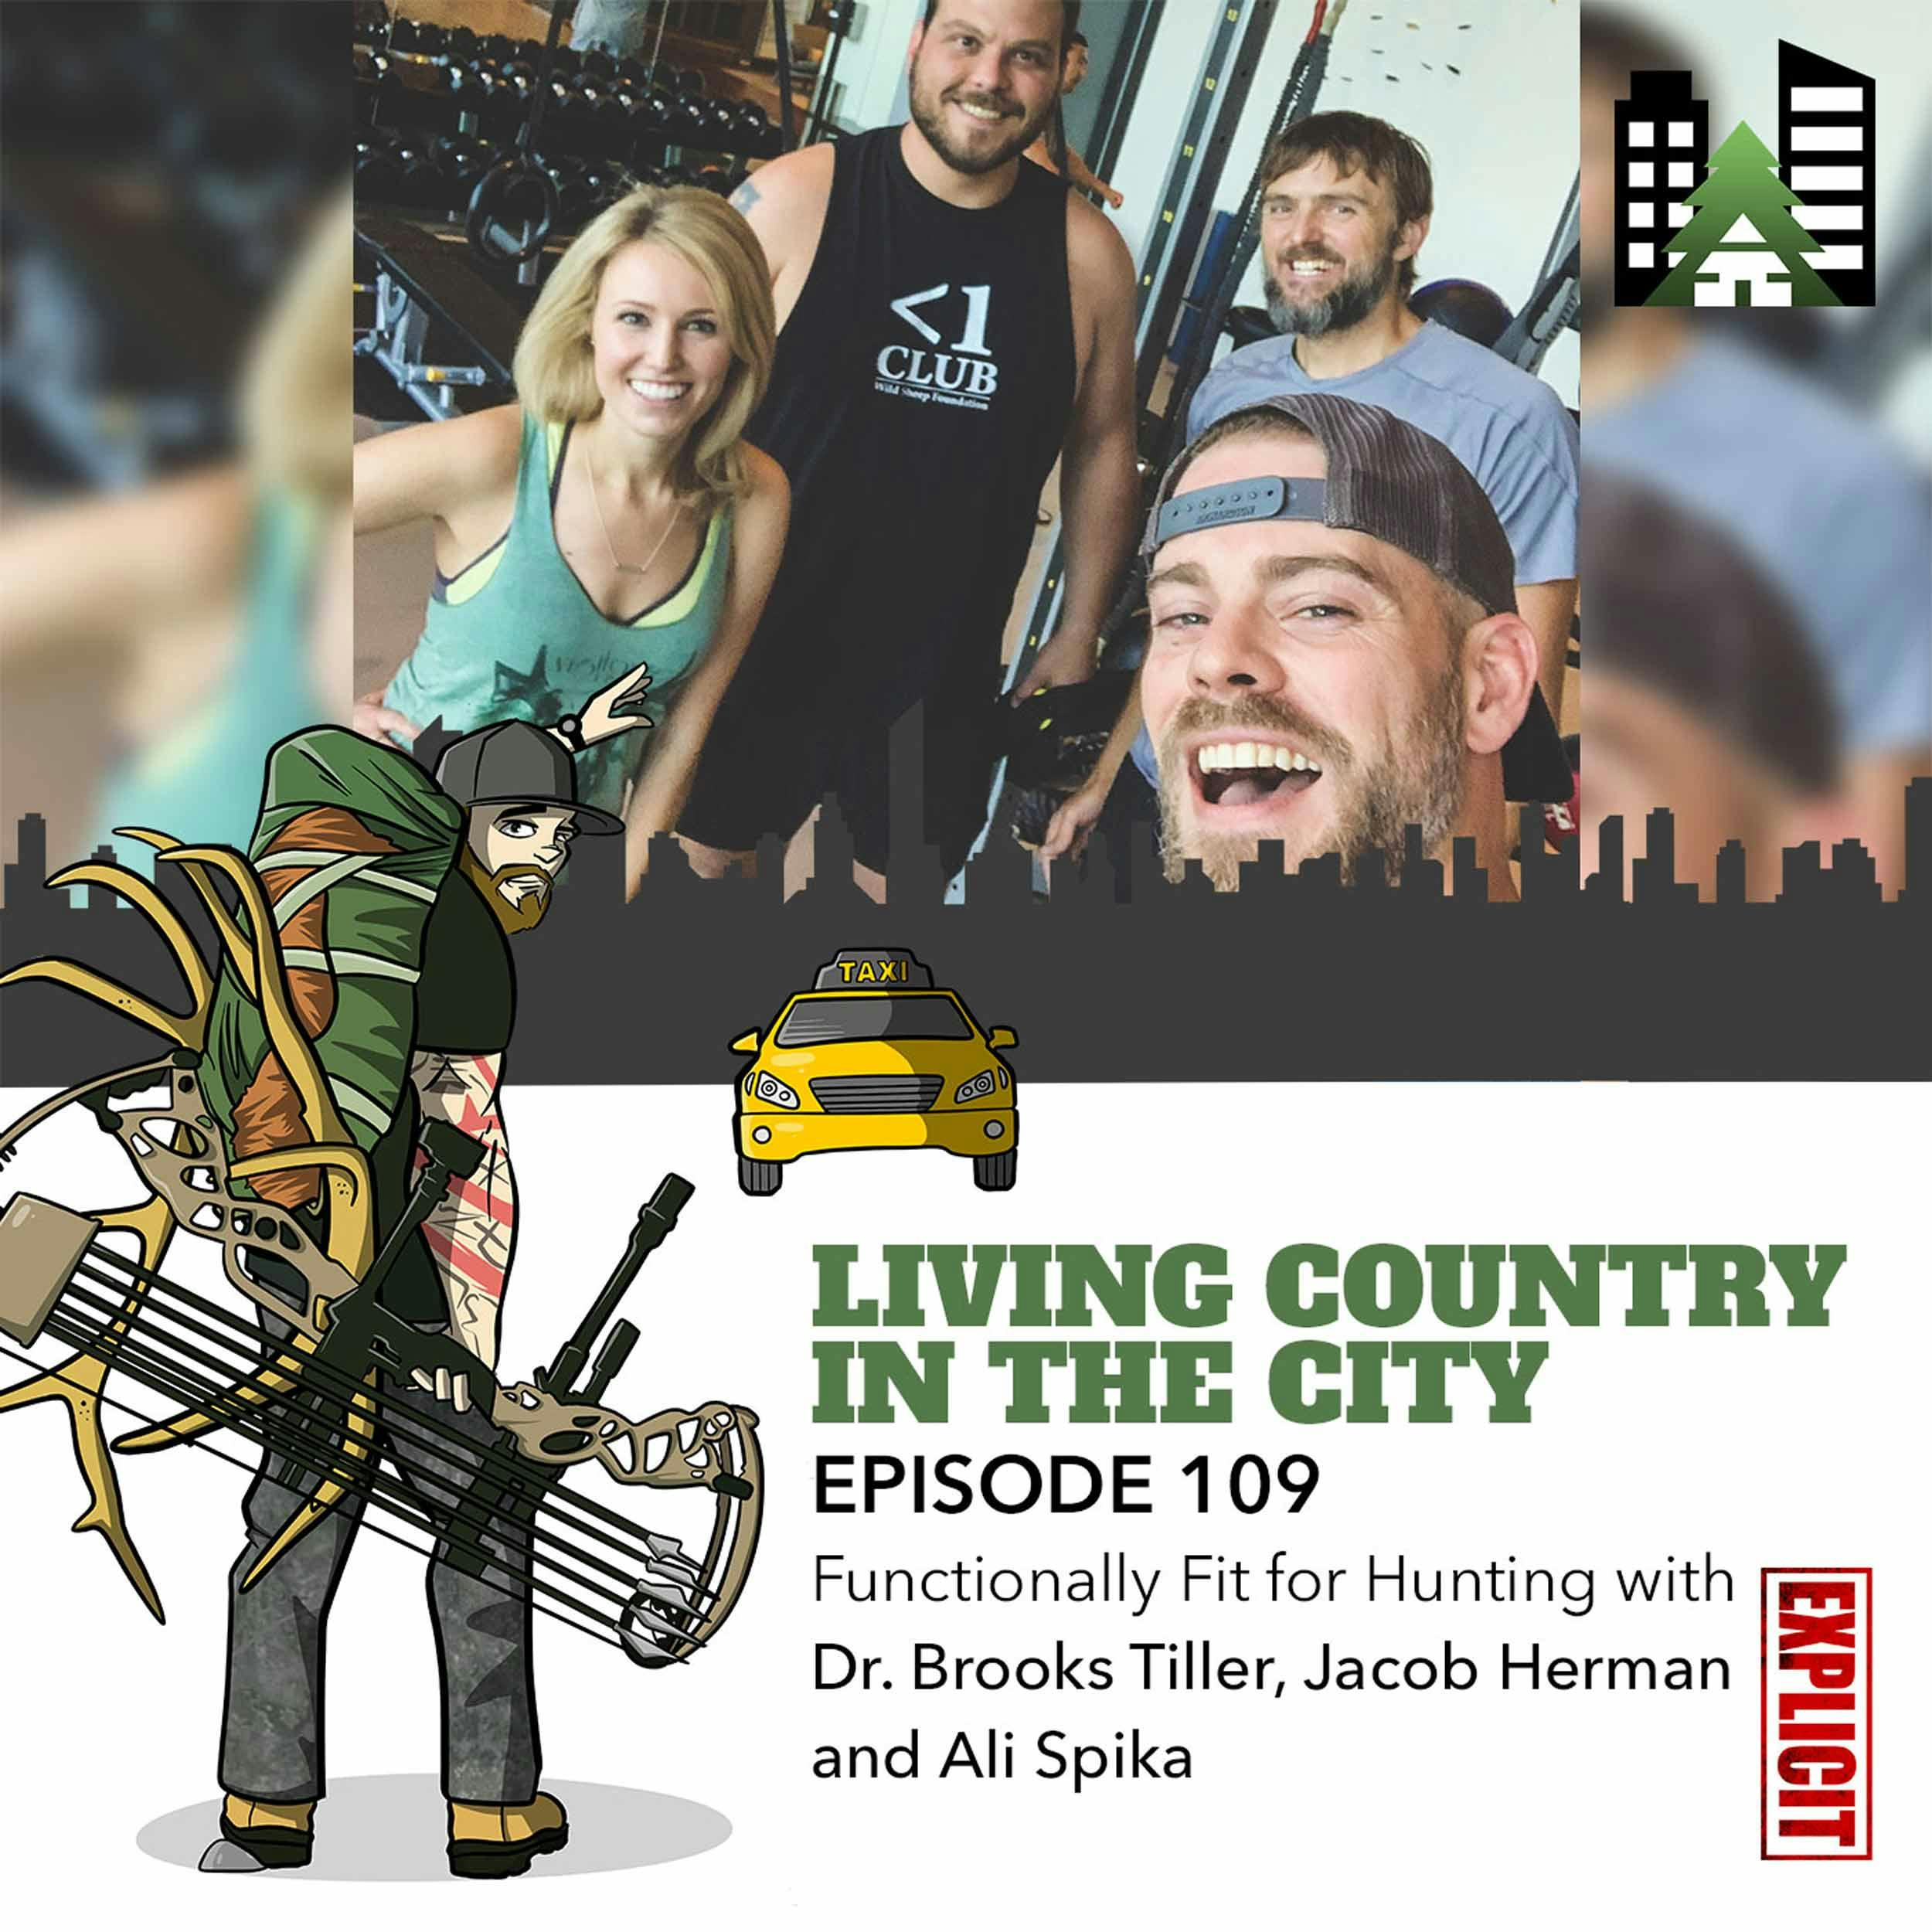 Ep 109 - Functionally Fit for Hunting with Dr. Brooks Tiller, Jacob Herman and Ali Spika